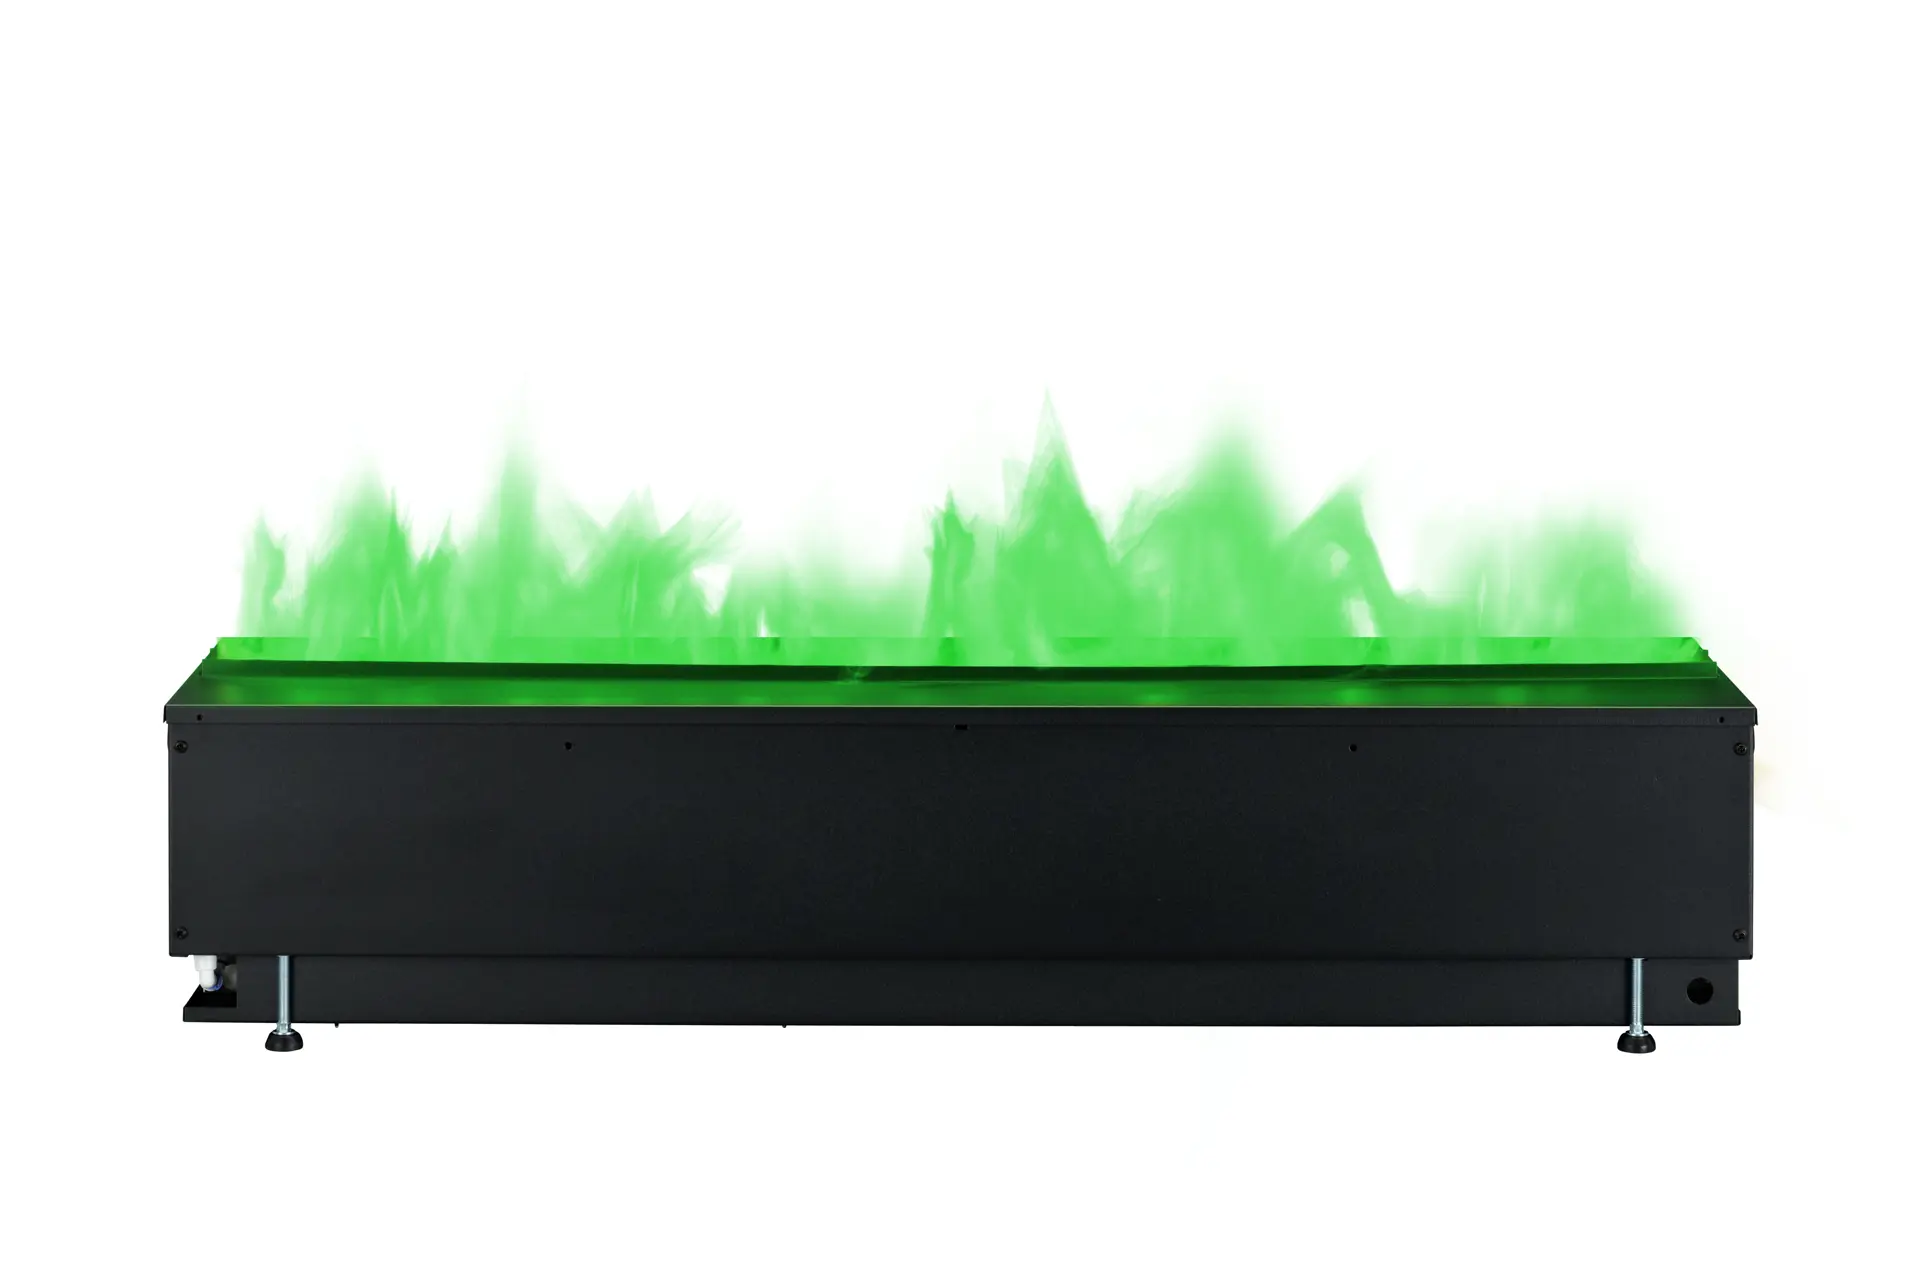 Dimplex_Cassette 1000 projects_400001275_Front Green Flame.jpg